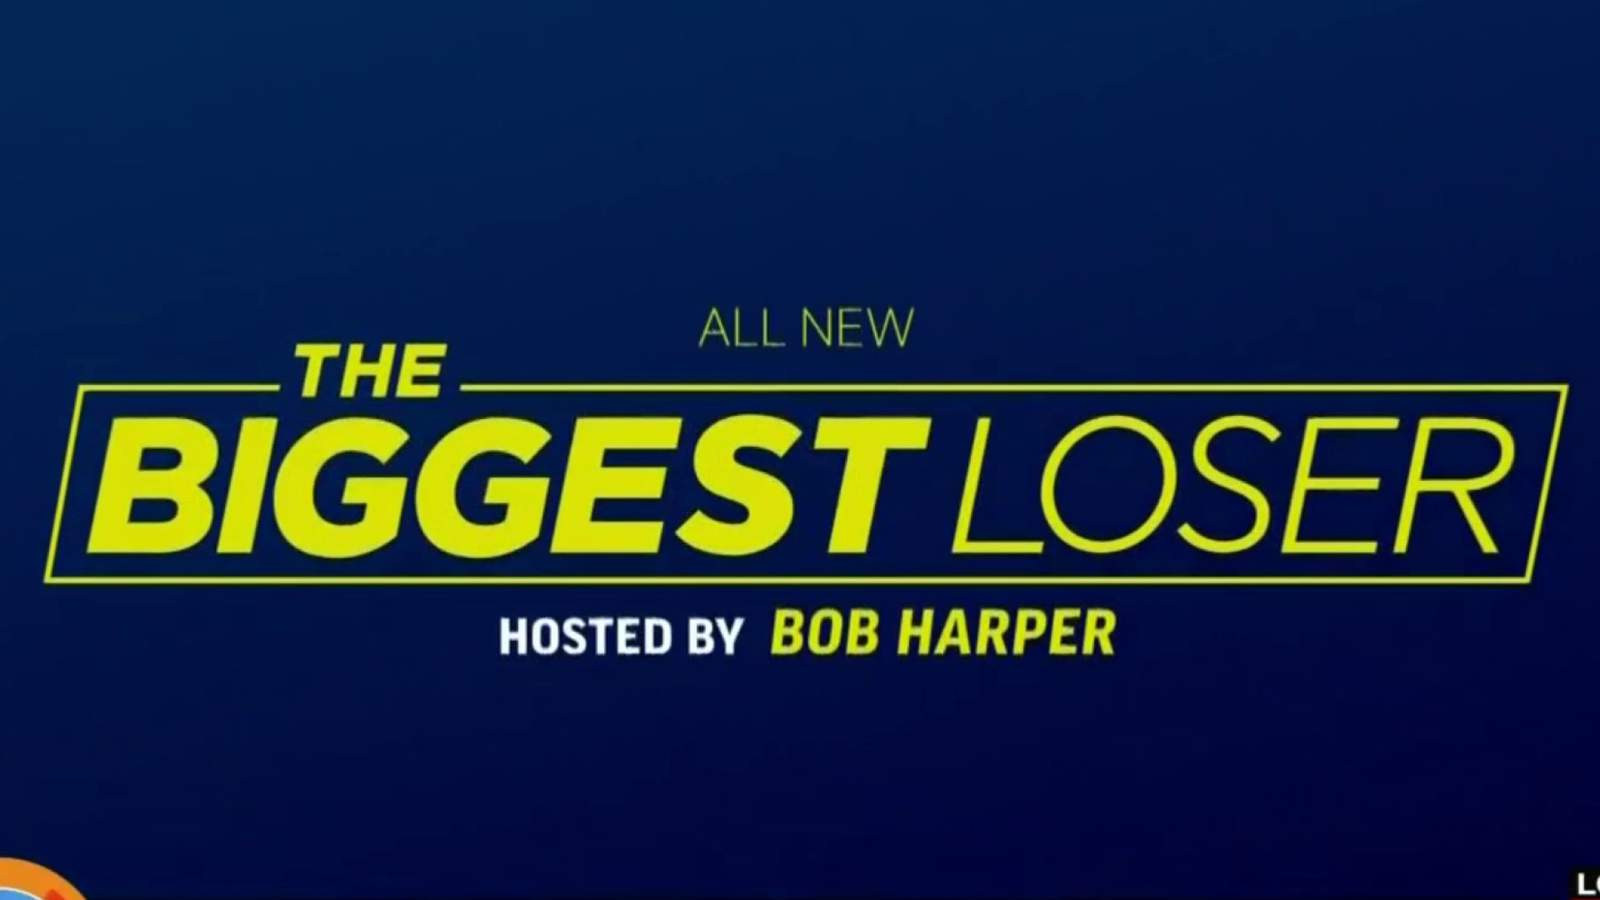 The Biggest Loser is looking for contestants in the D